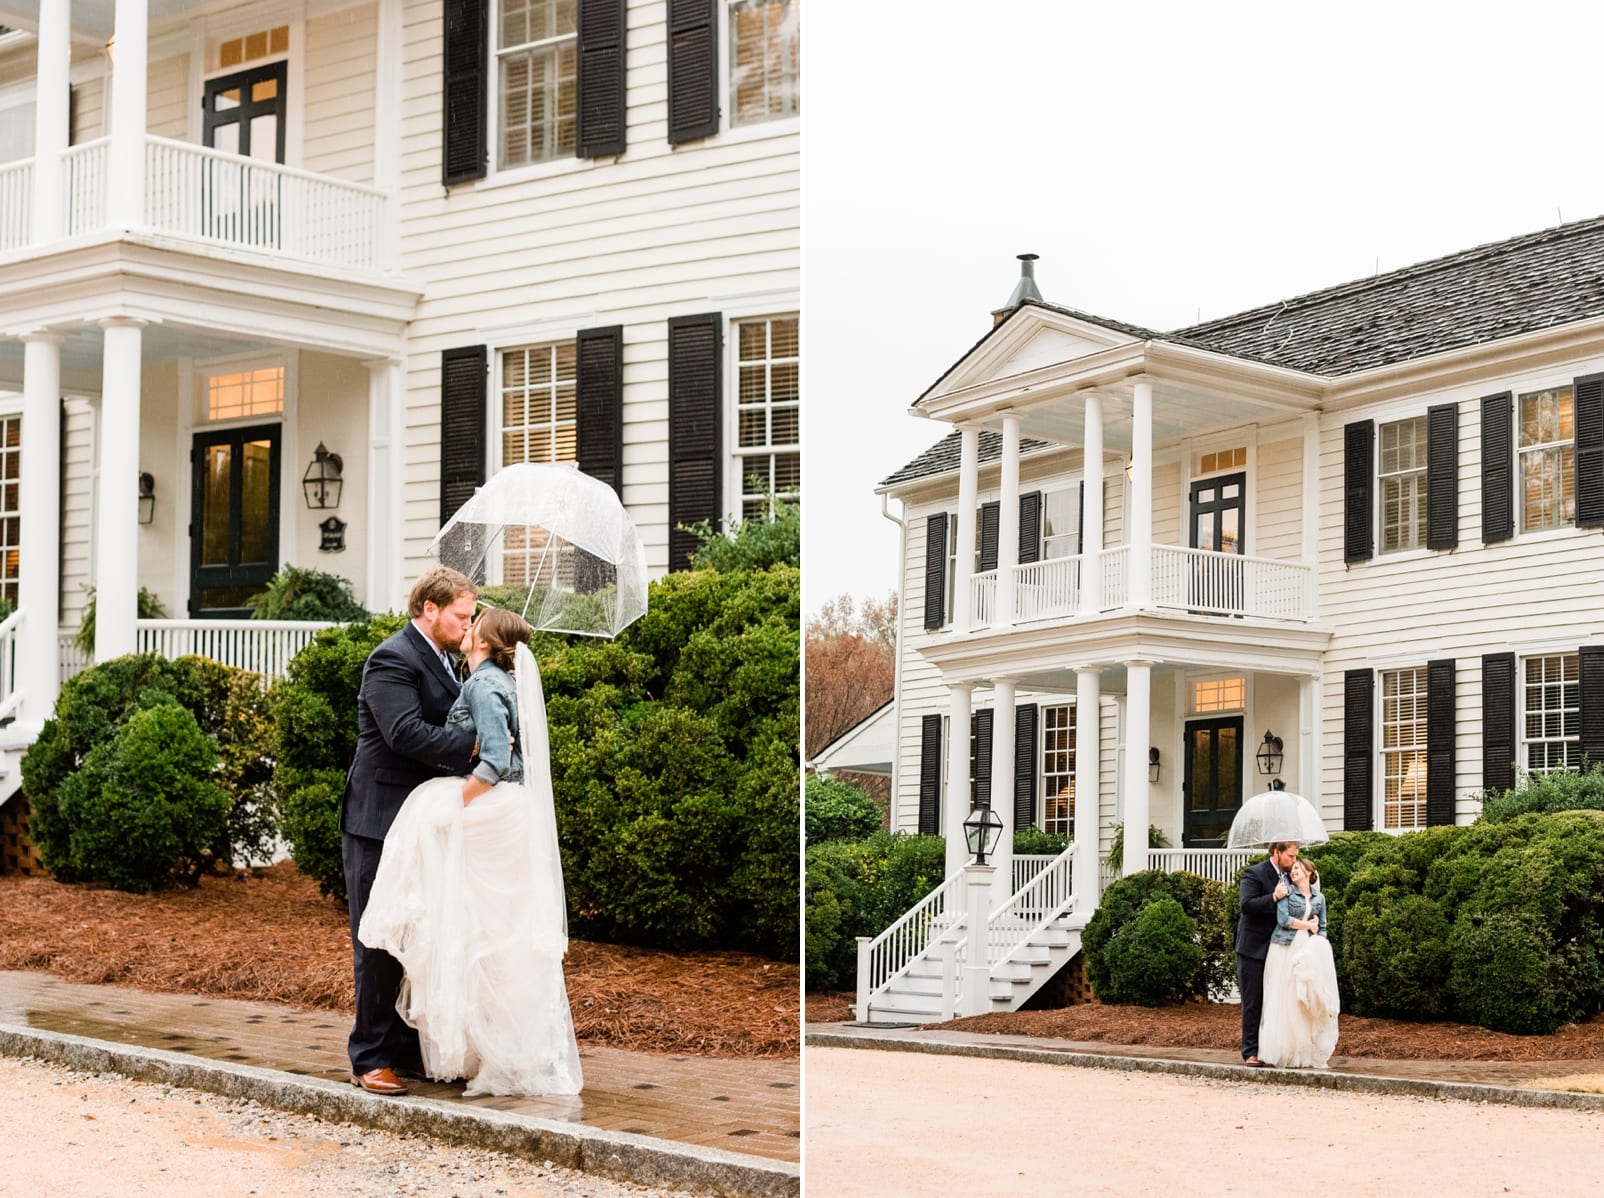 Sutherland Estate bride and groom embracing under a clear umbrella in front of the estate photo